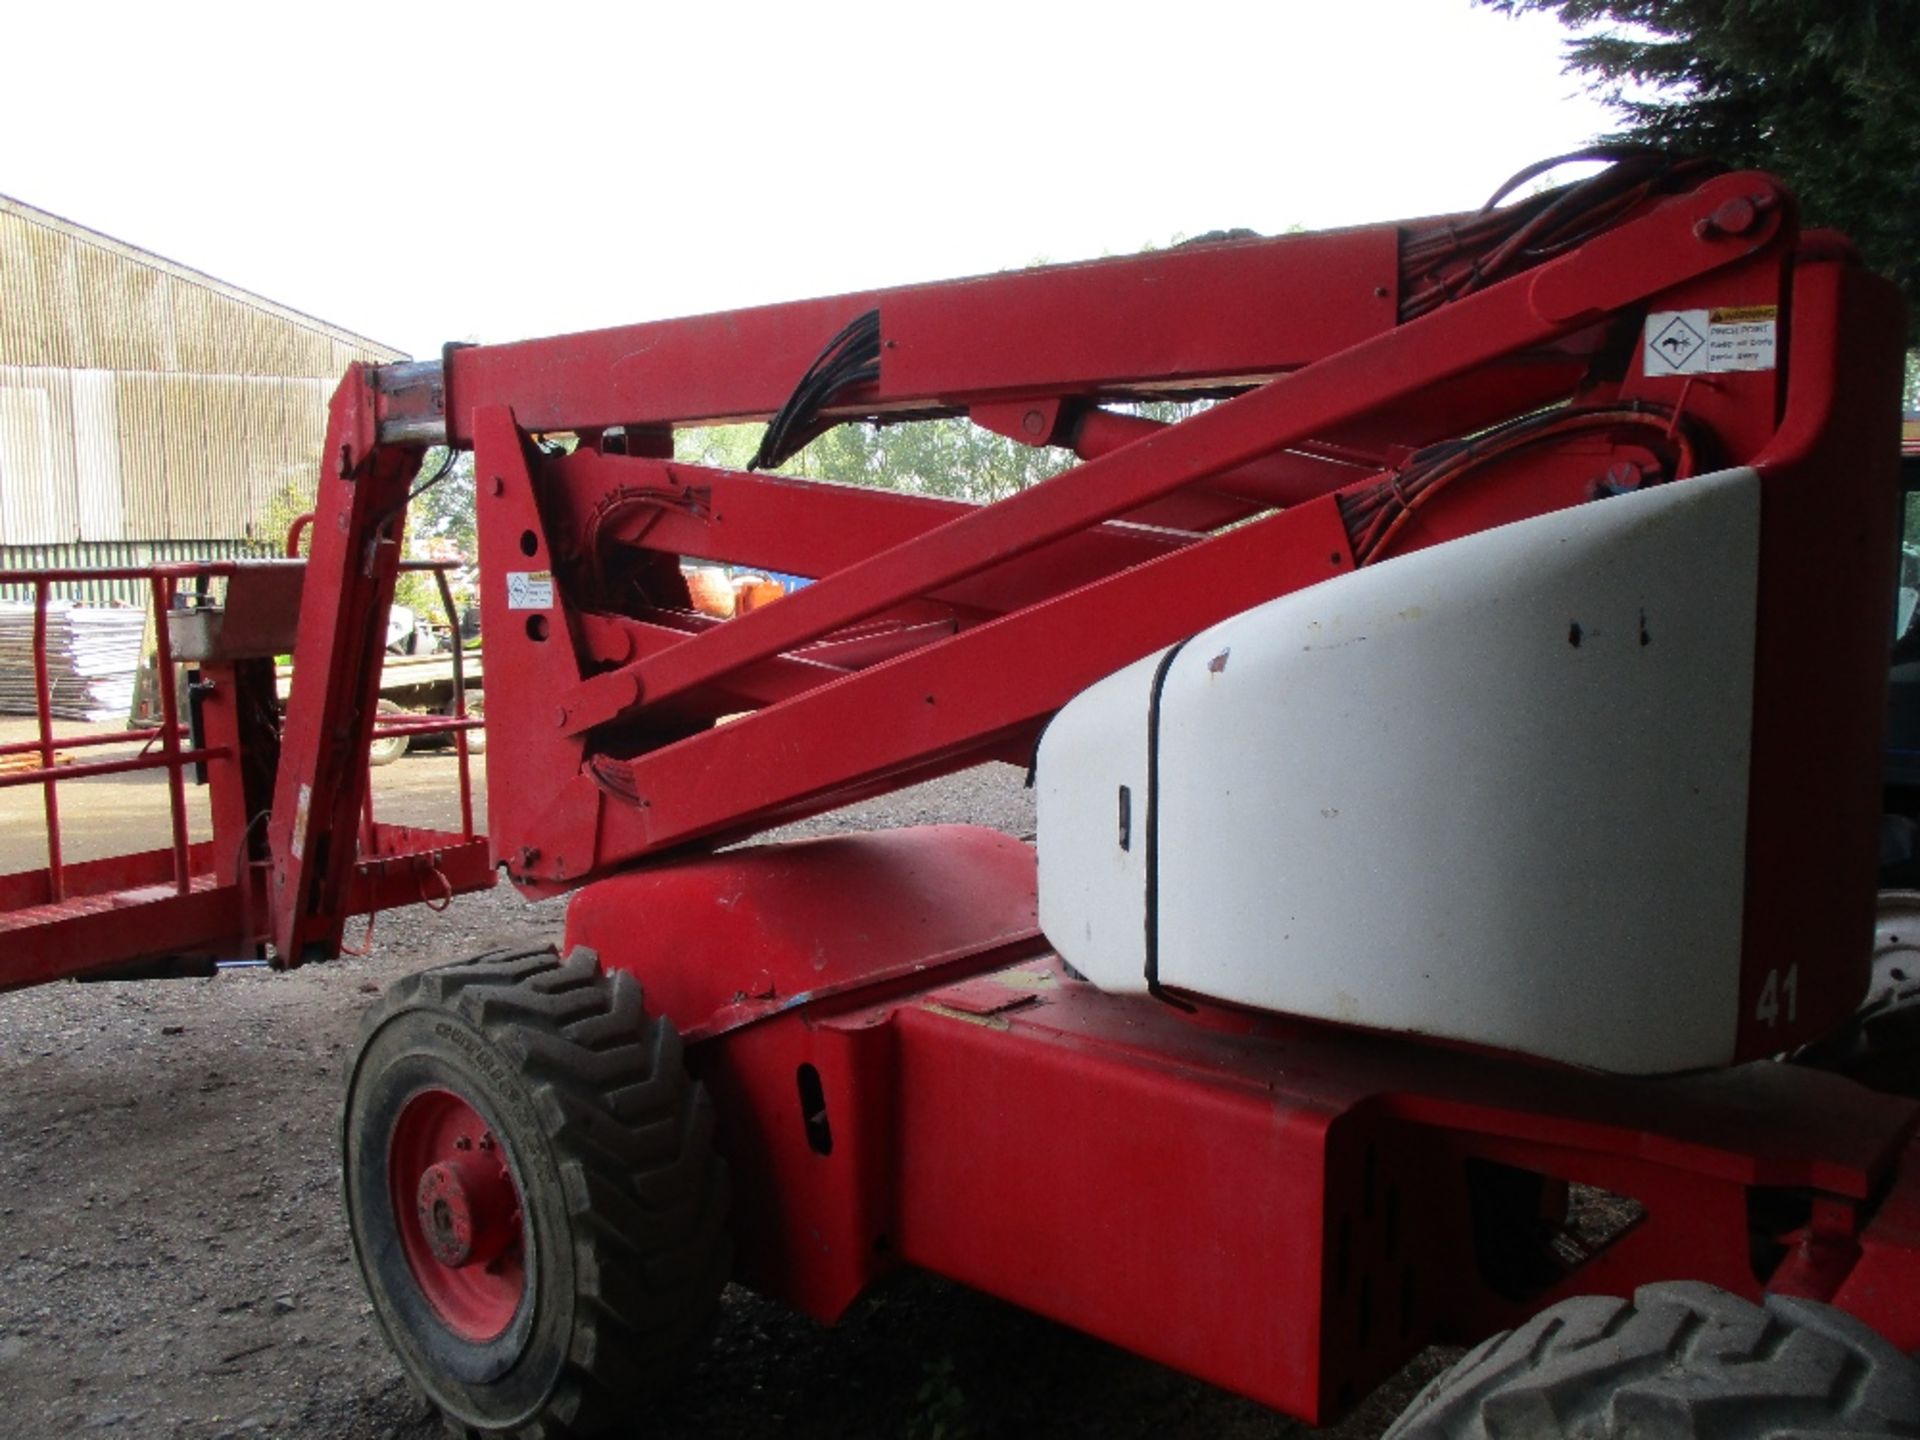 UPRIGHT AB-46 RT DIESEL POWERED 4 WHEEL DRIVE BOOM ACCESS UNIT - Image 6 of 7